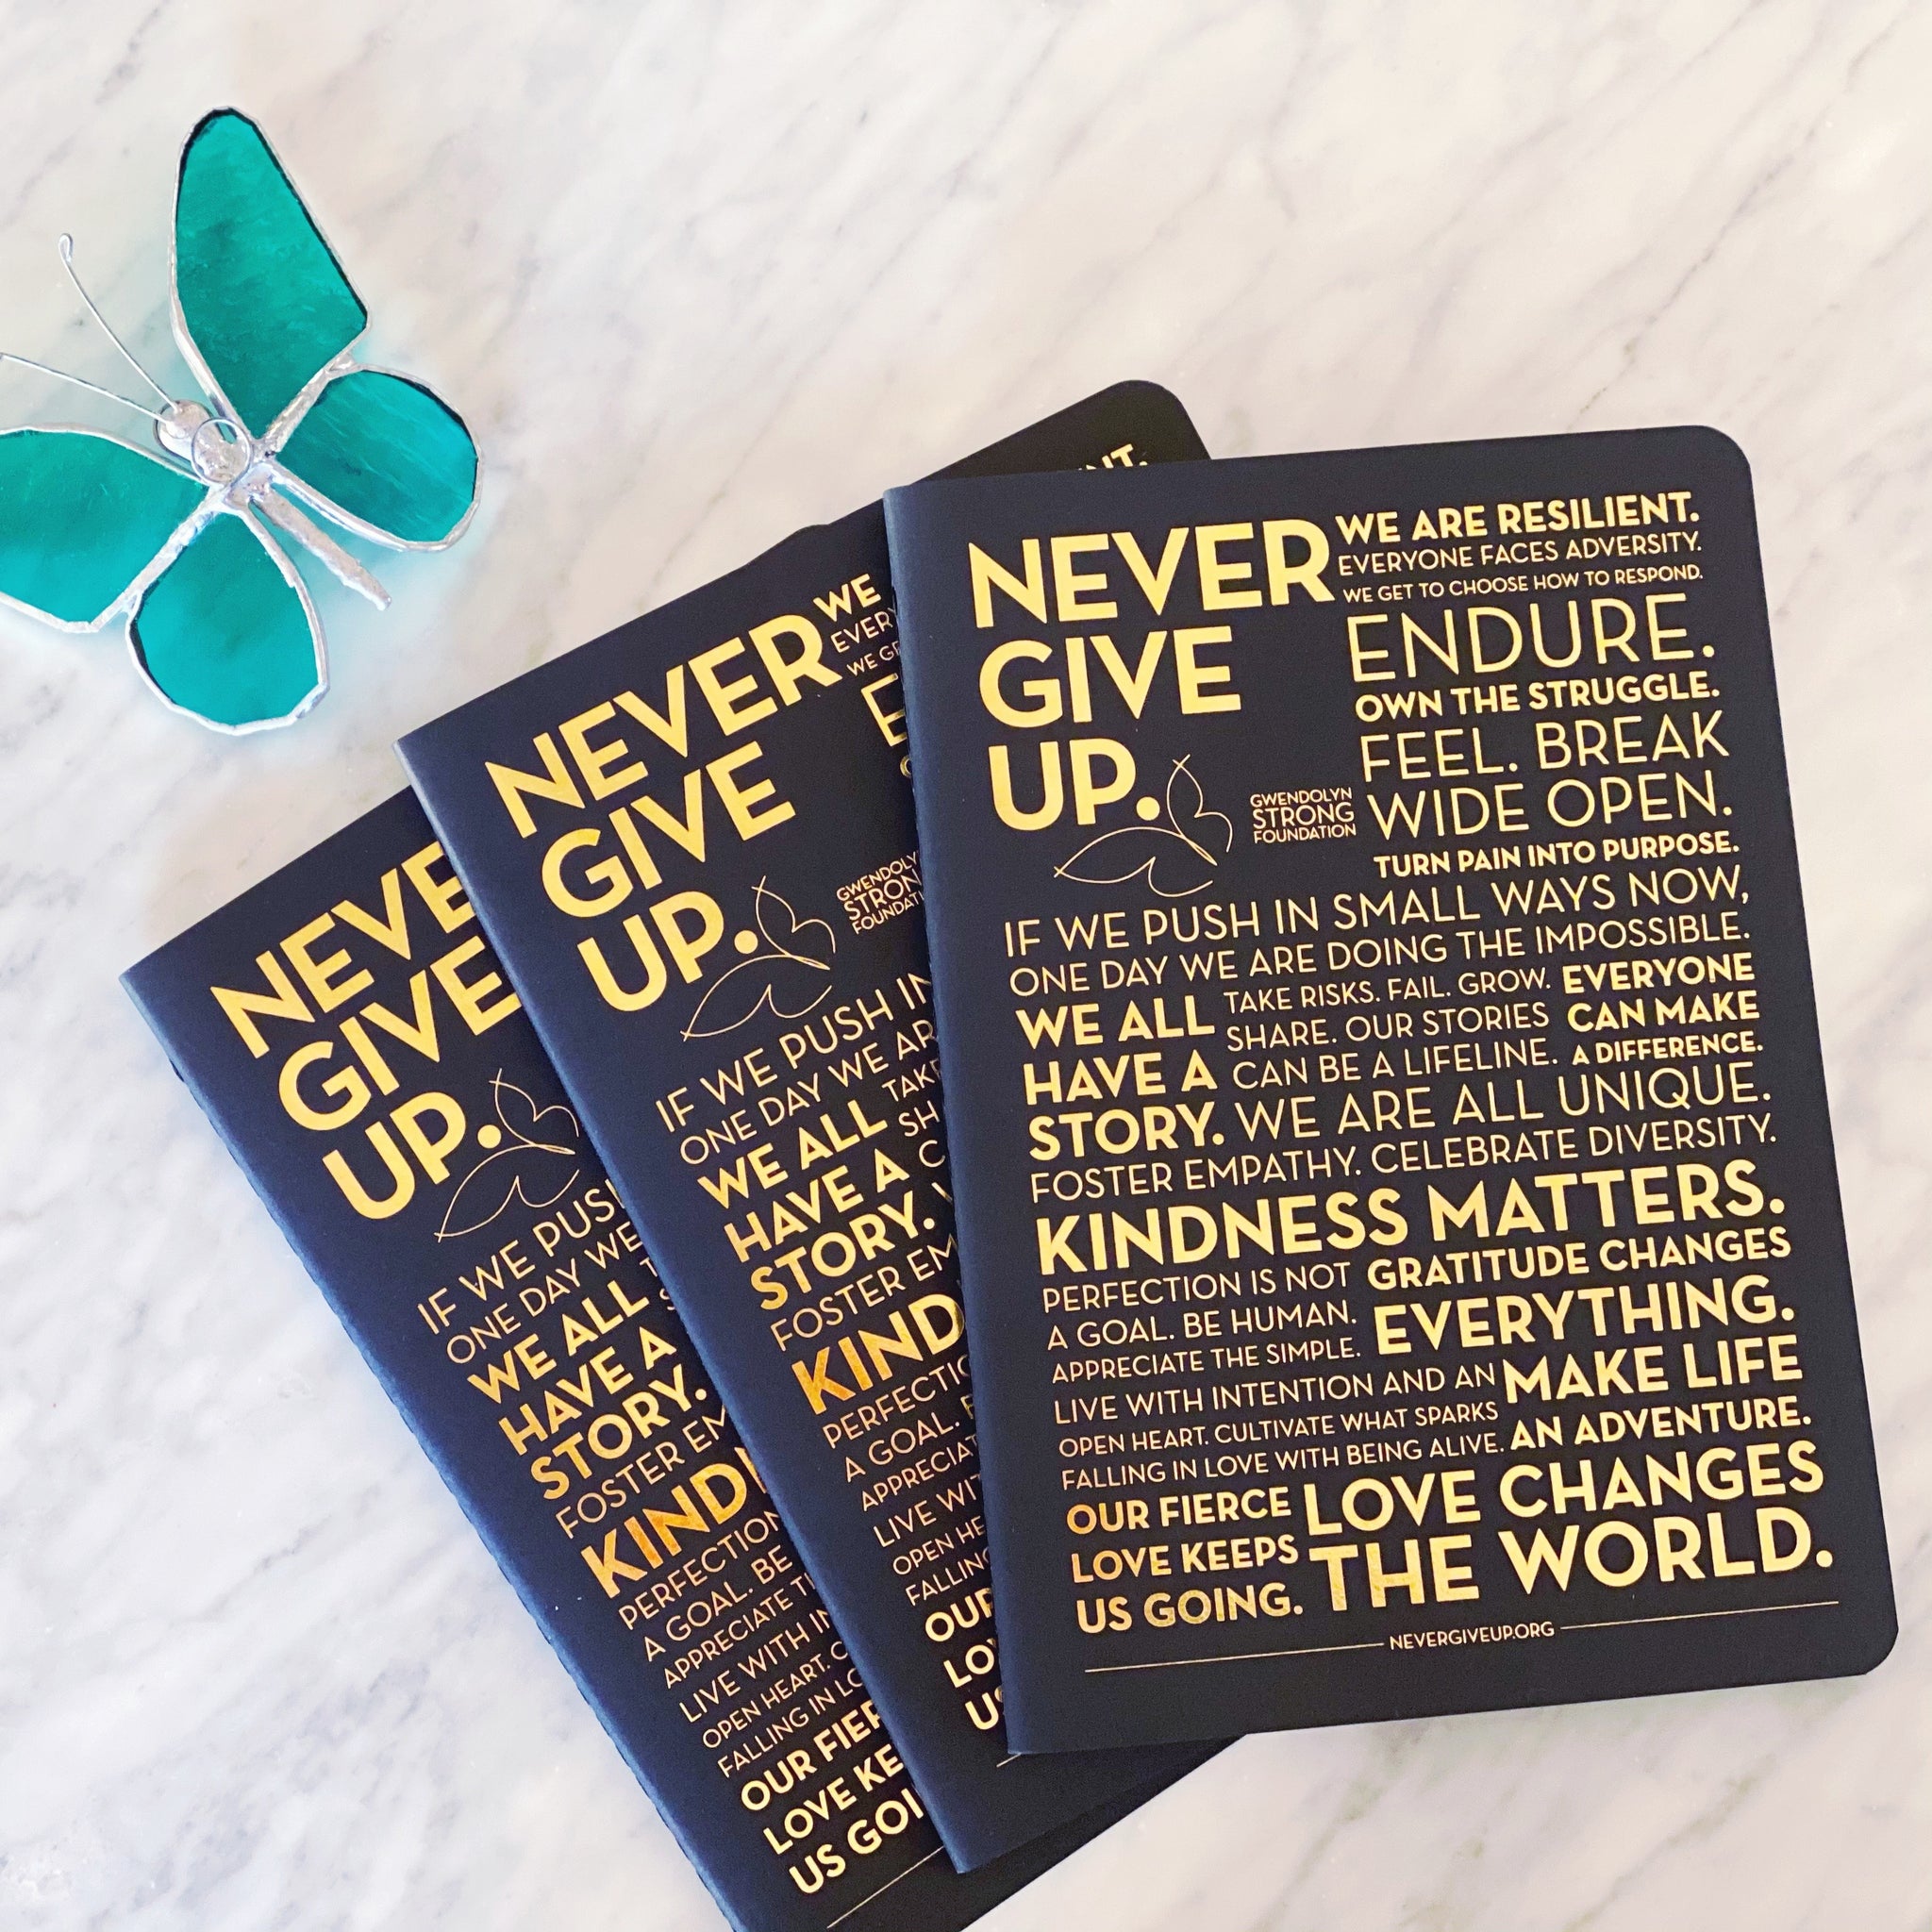 NEVER GIVE UP. MANTRA JOURNAL